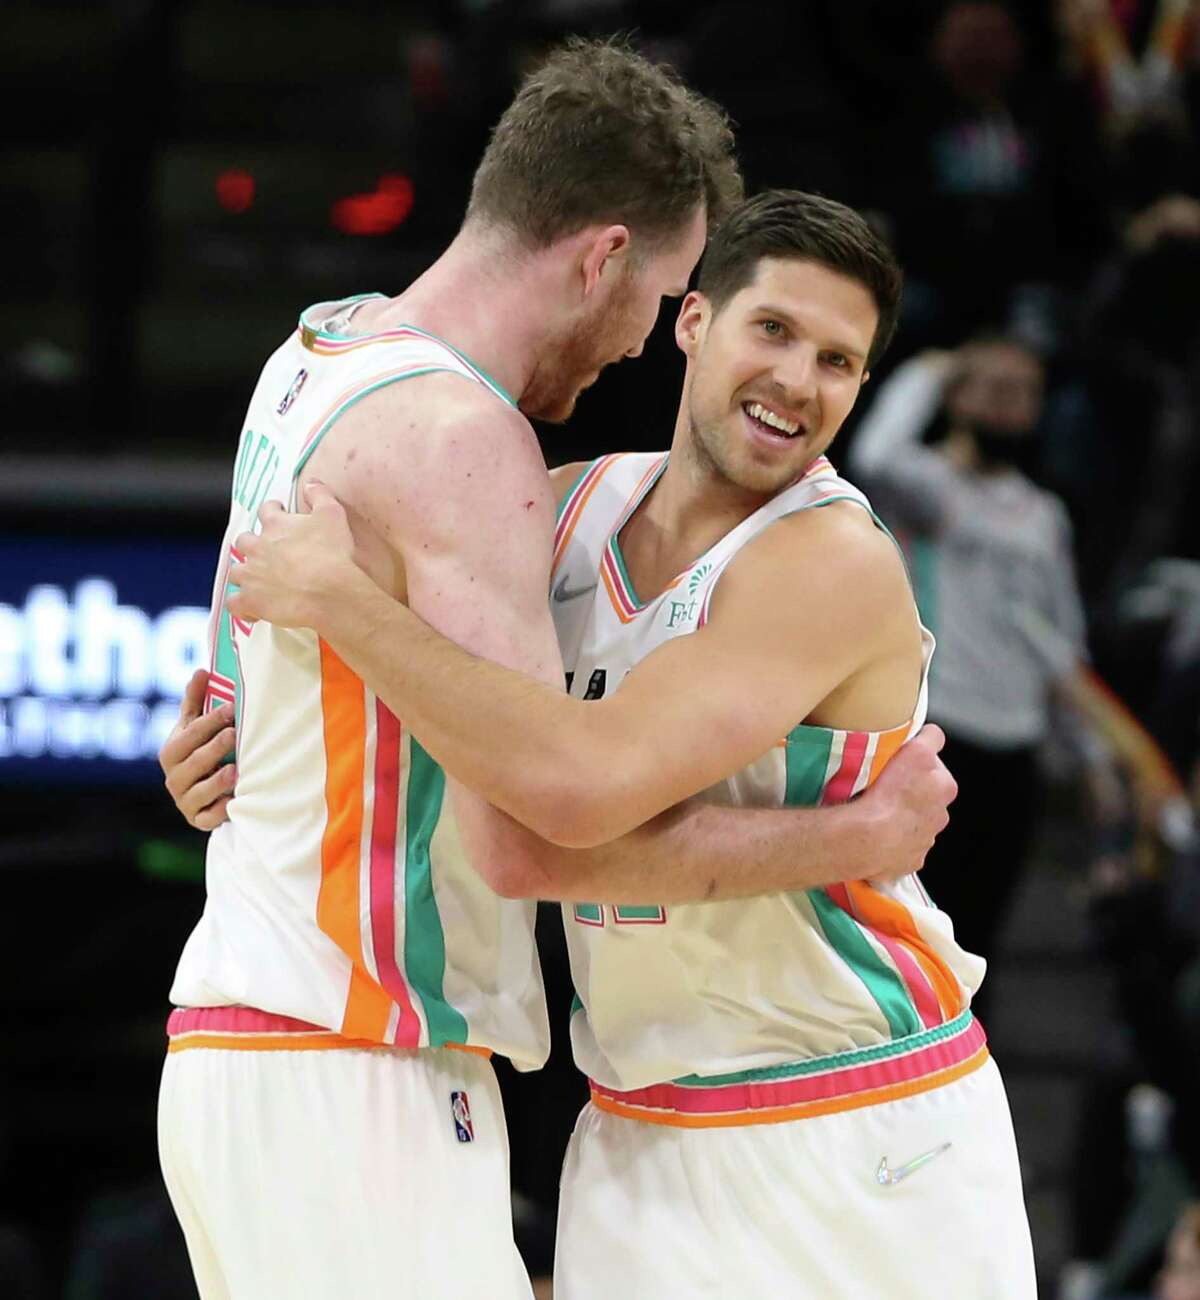 Spurs’ Doug McDermott (17) gives a hug to teammate Jakob Poeltl (25) after scoring a three against the Houston Rockets in the second half at the AT&T Center on Friday, Feb. 4, 2022. Spurs defeated the Rockets, 131-106.